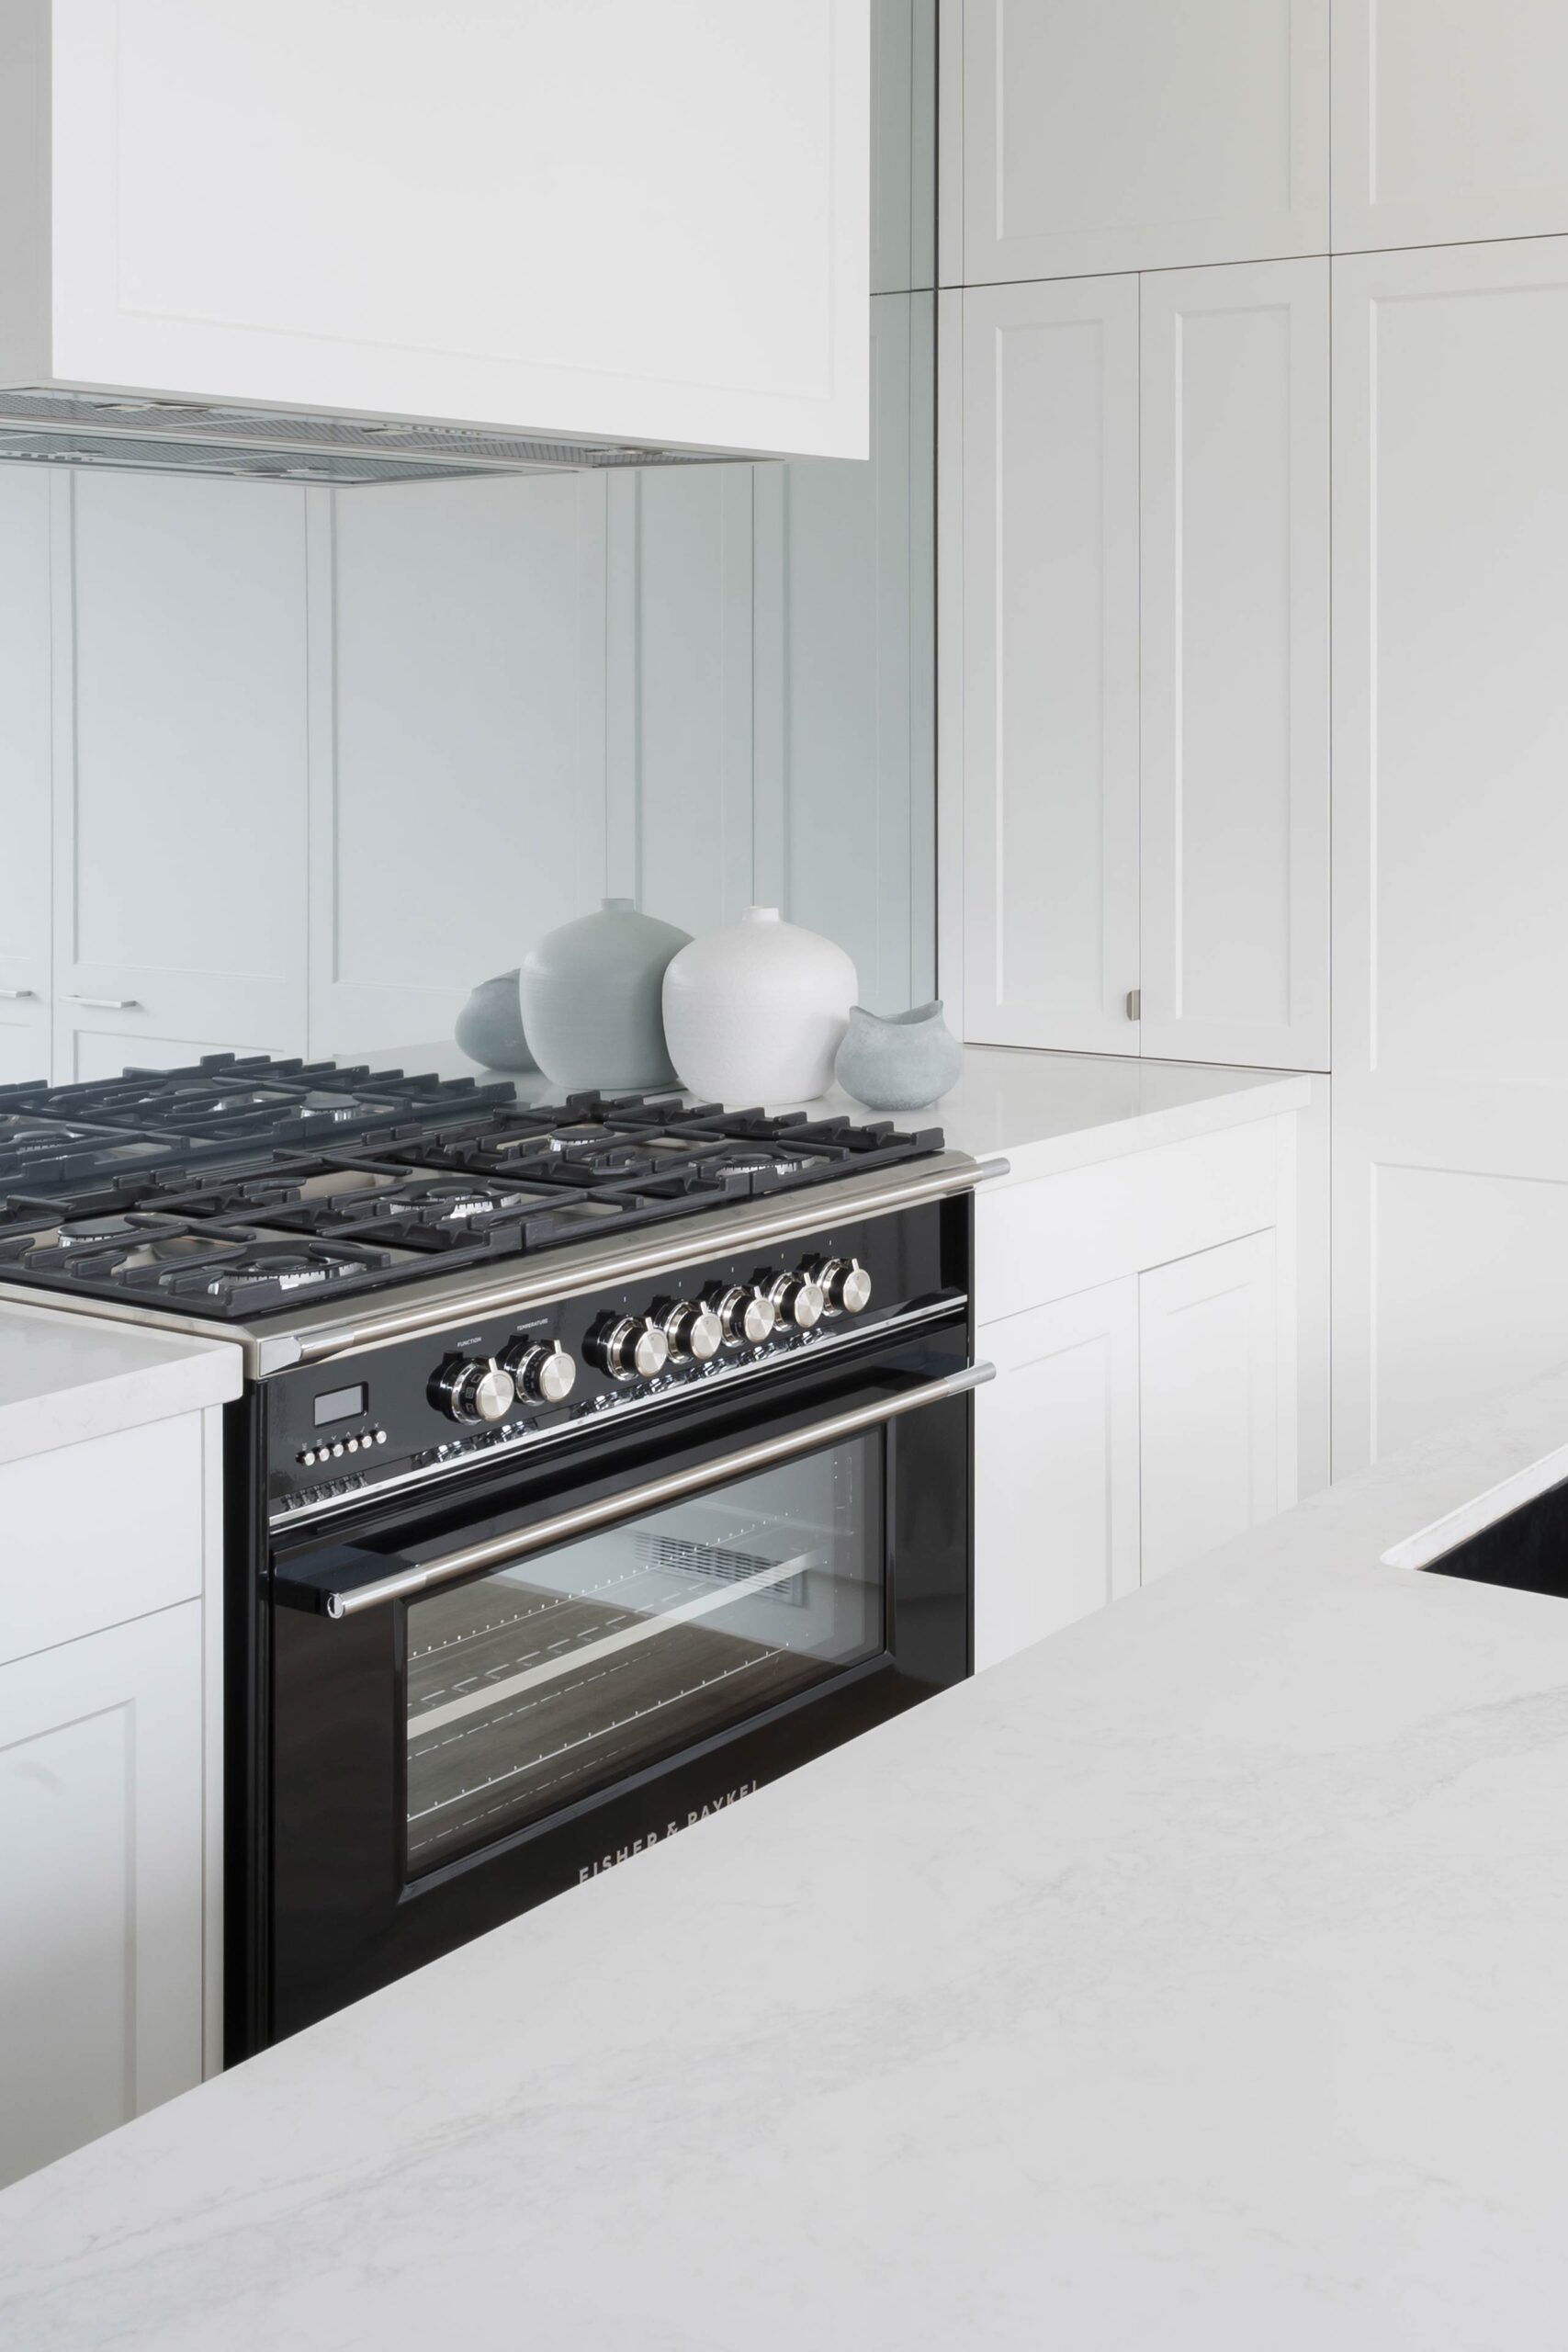 White Shaker style kitchen cabinetry with glass mirror splashback and a Fisher & Paykel freestanding black oven